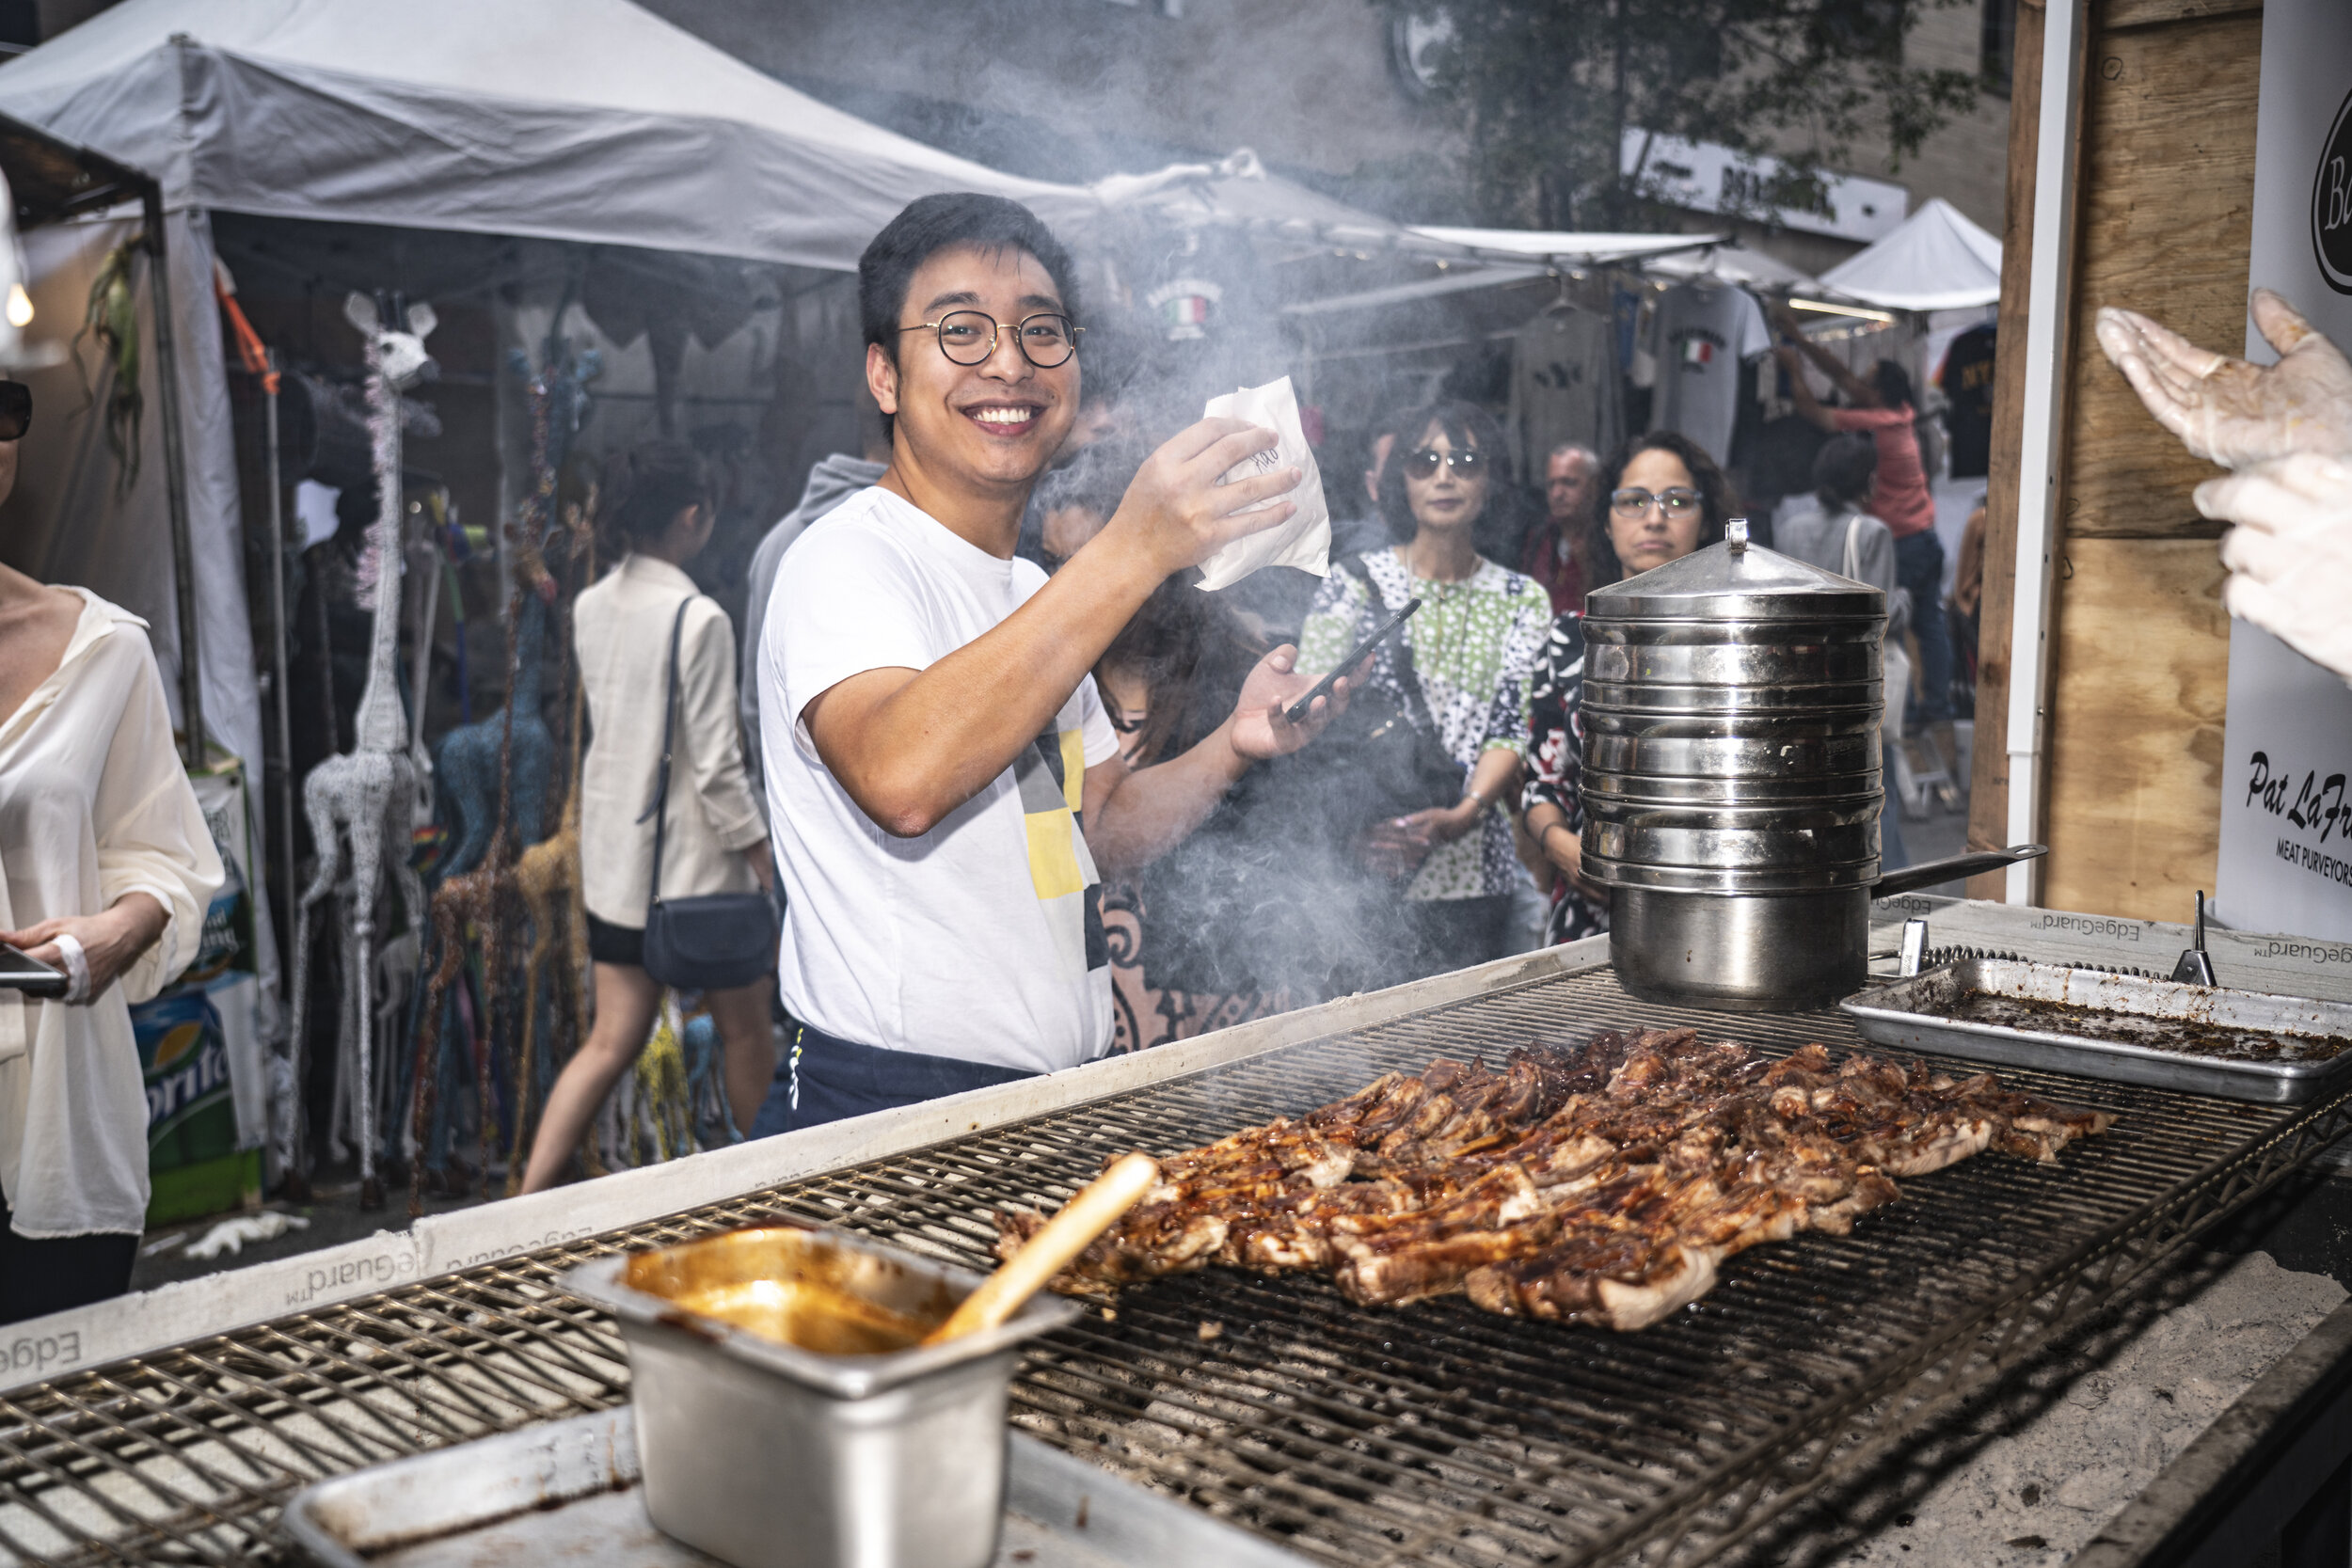  We dined out for good during our Major Good pop-up at the NYC San Gennaro Festival 